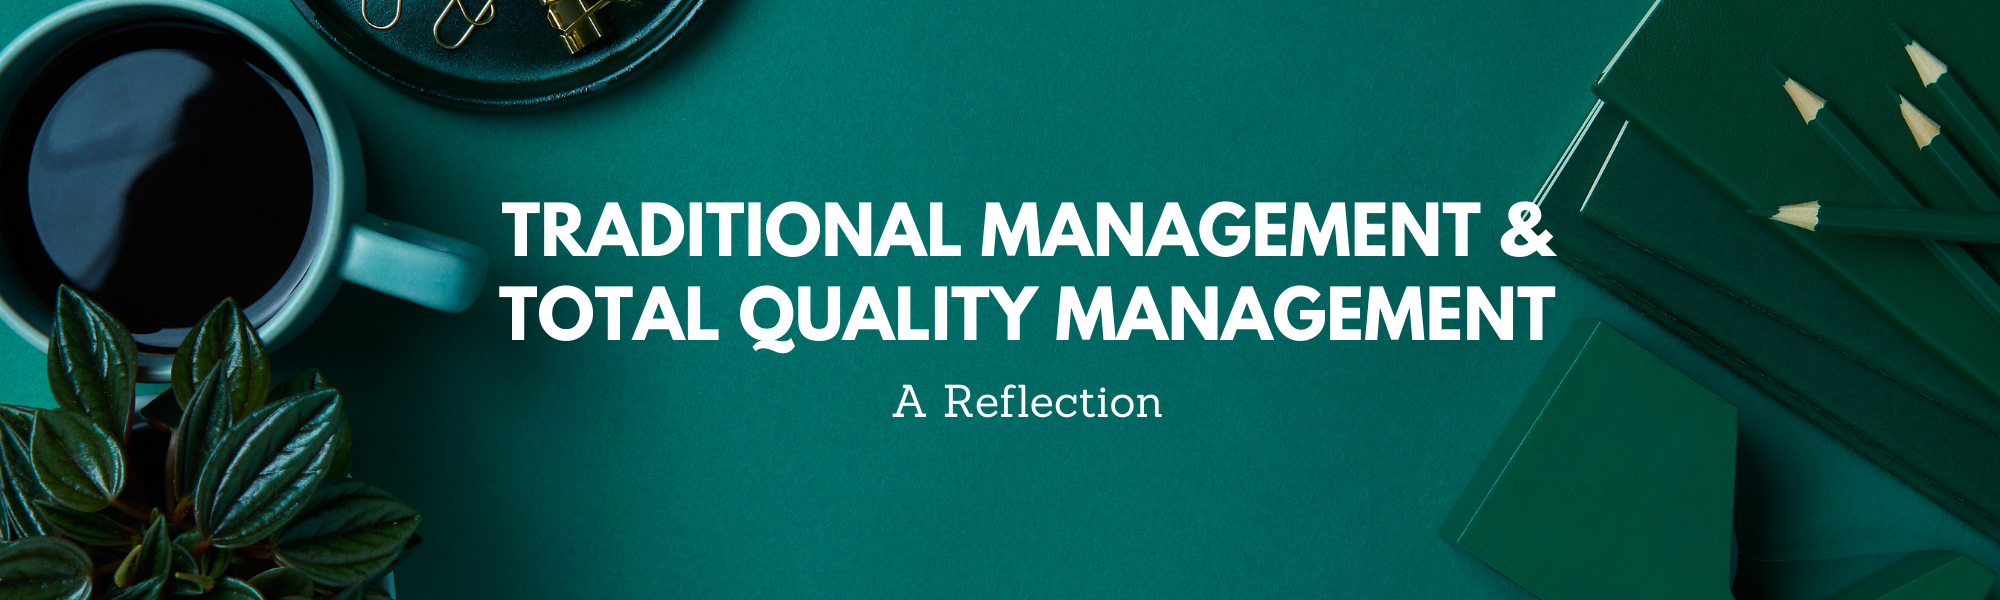 difference between total quality management and traditional management